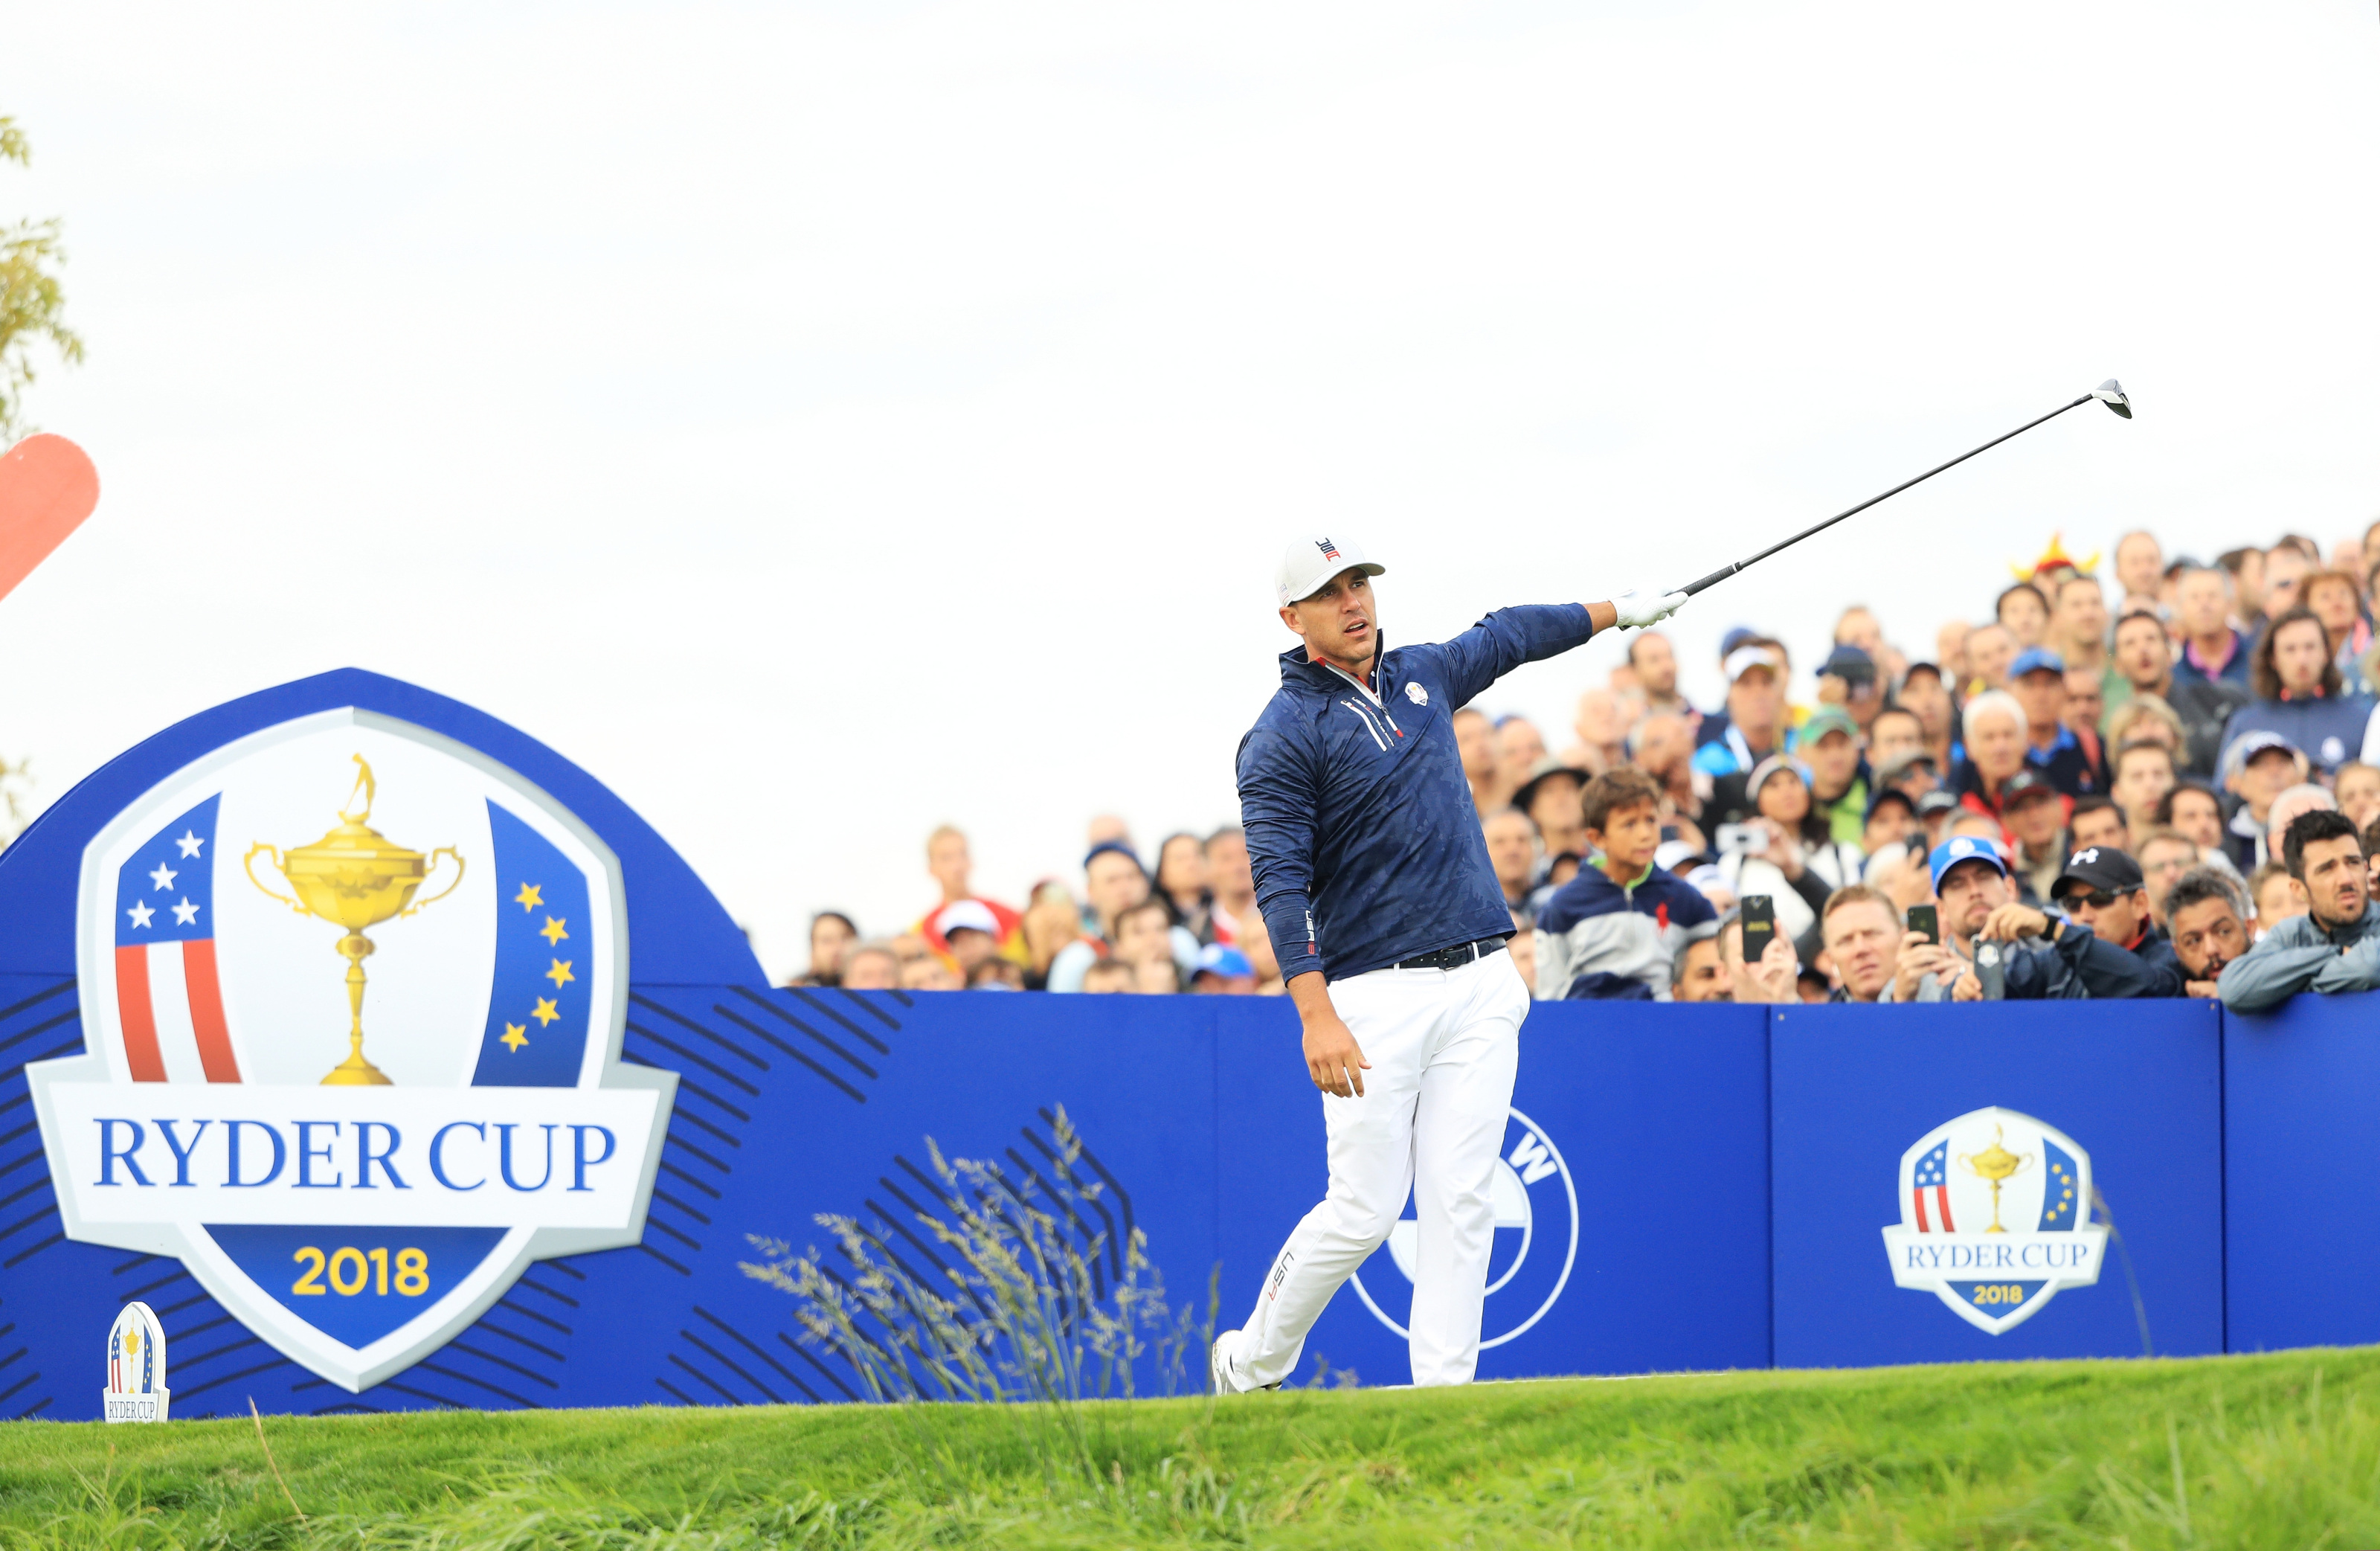 Golf has undergone a popularity boom” - Ryder Cup collaborates